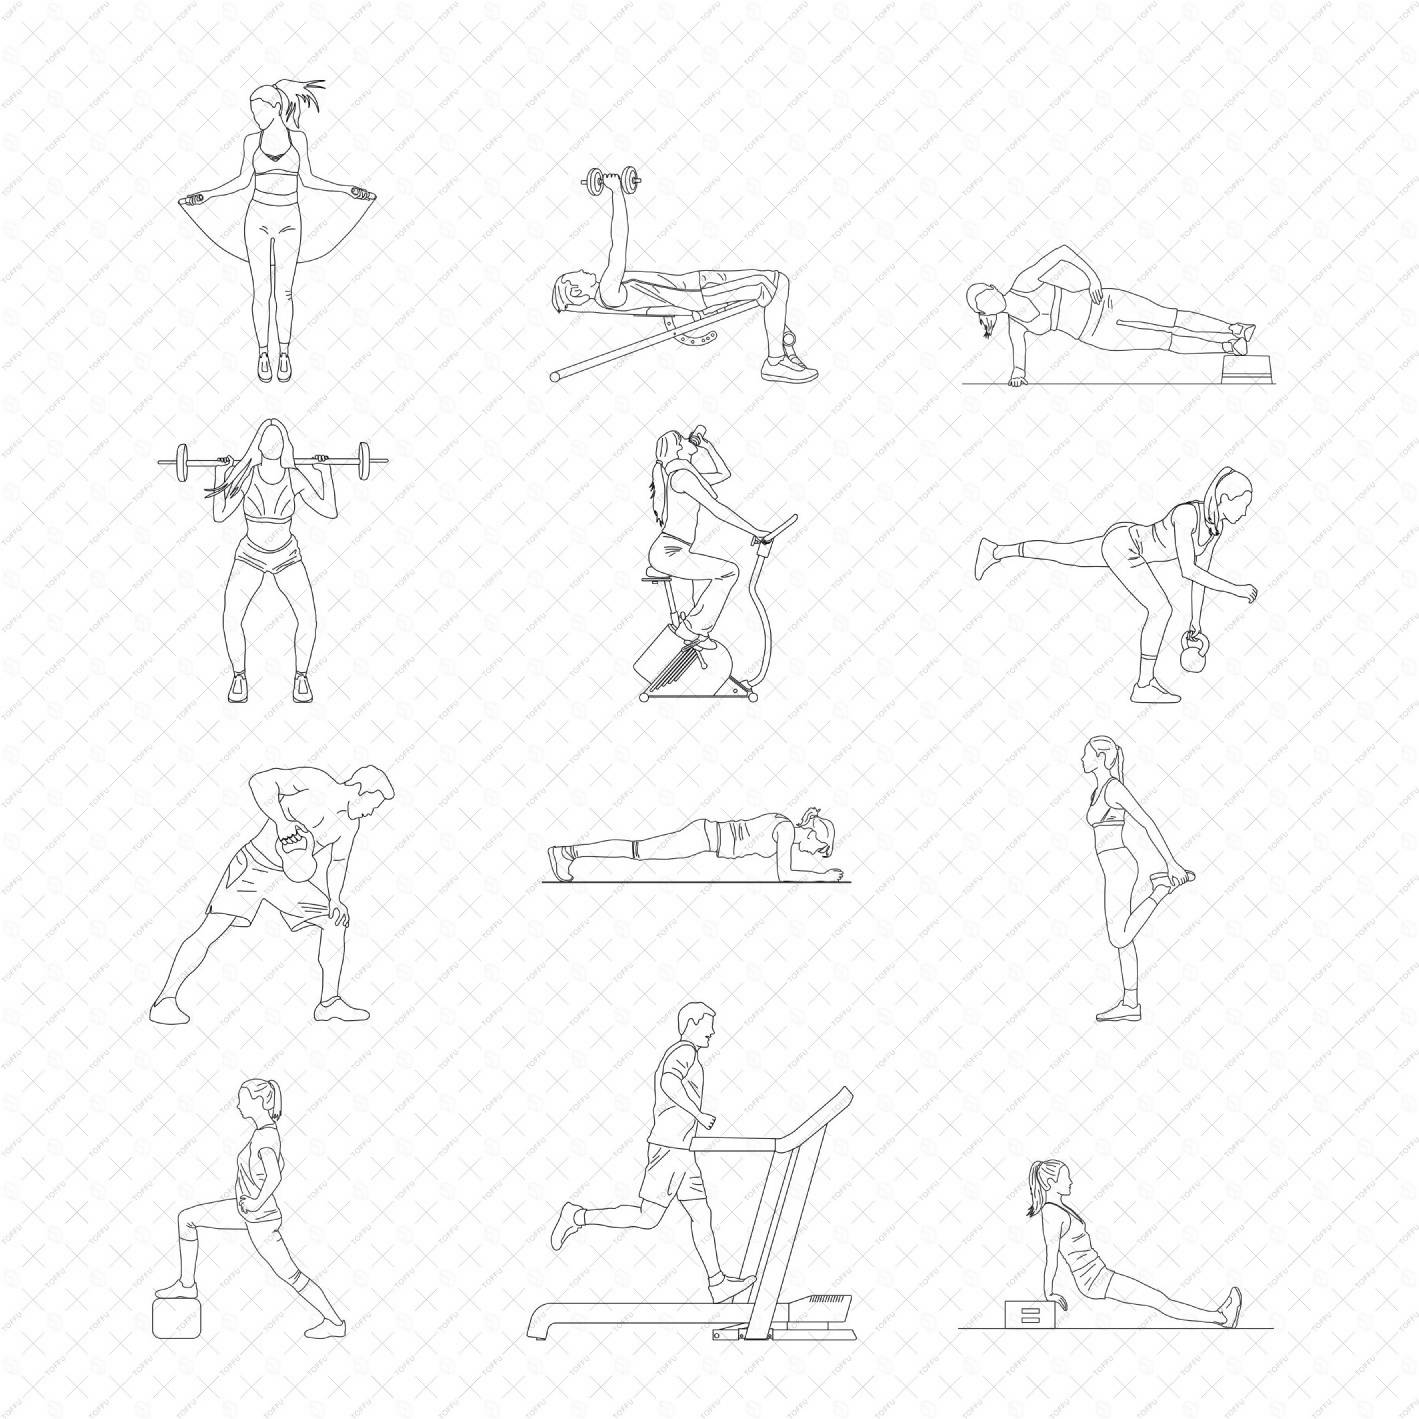 Cad People Fitness DWG | Toffu Co